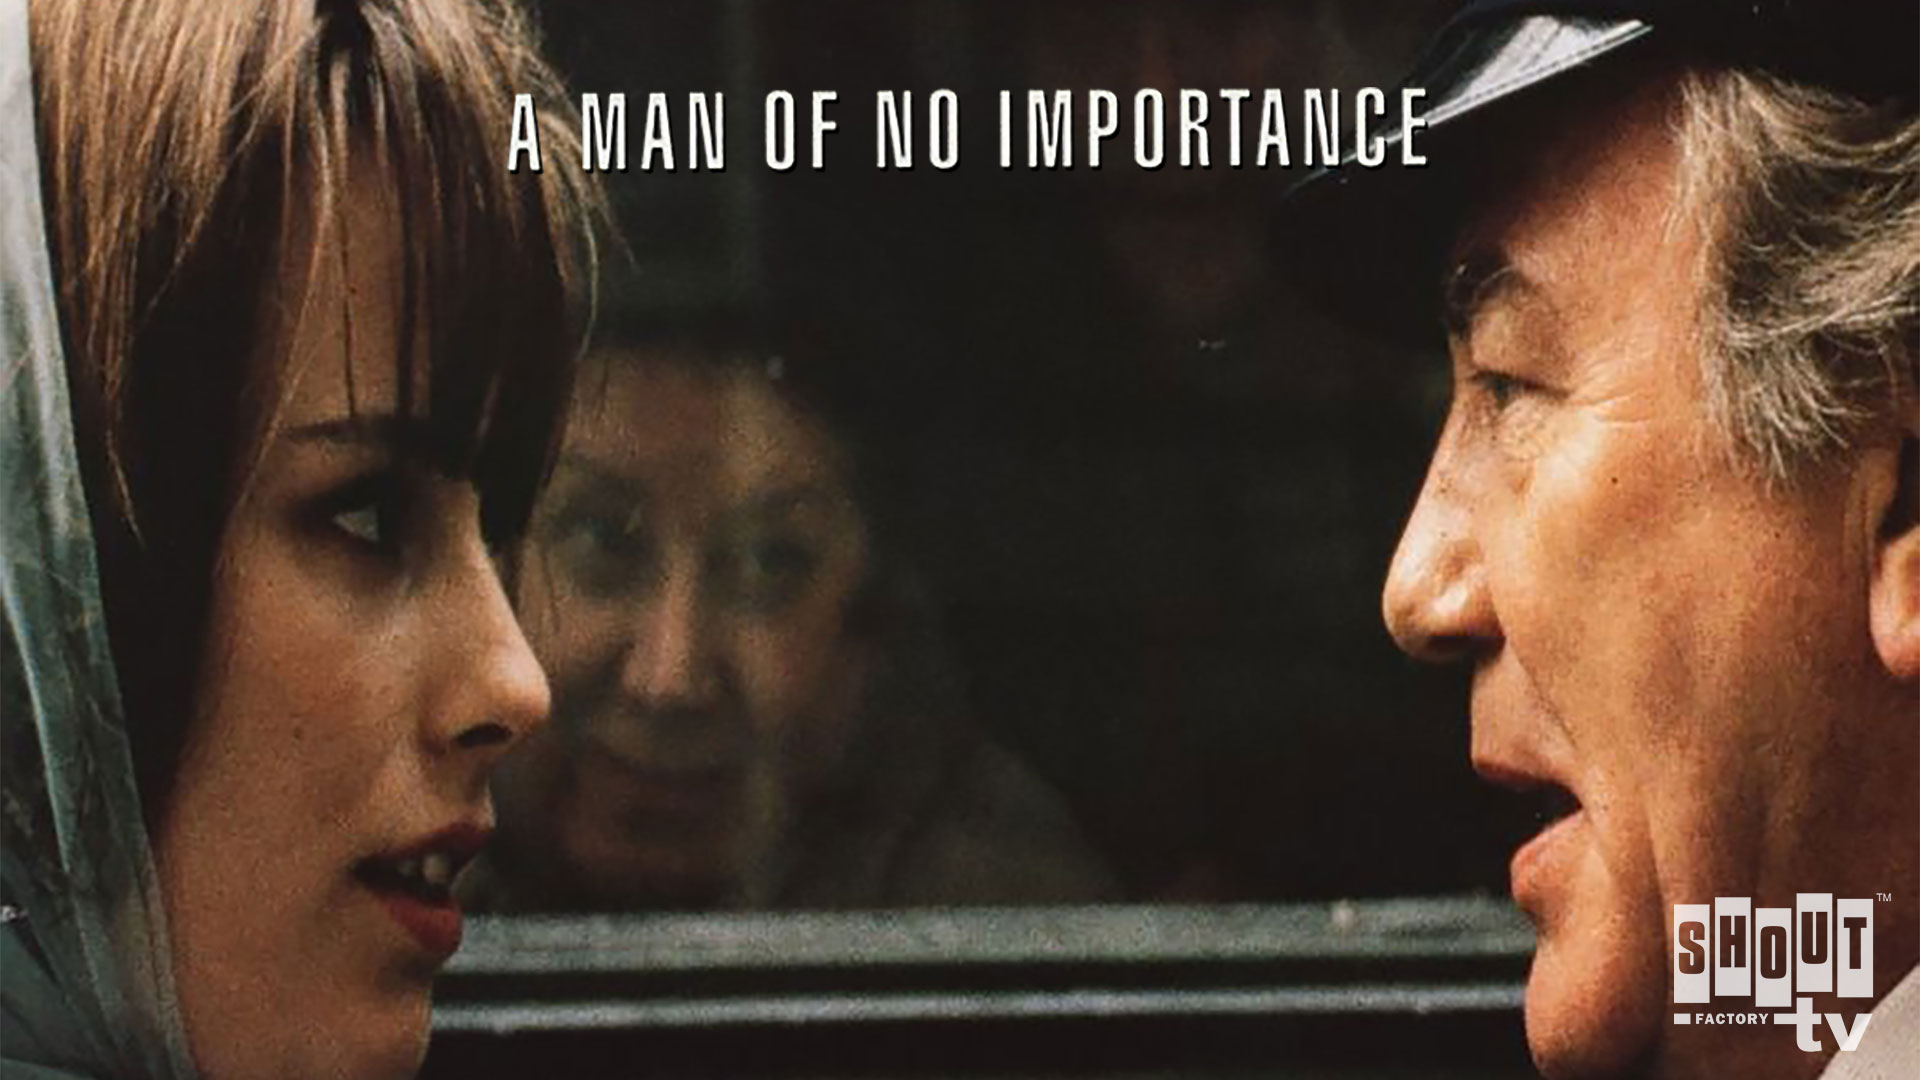 A Man Of No Importance - Trailer